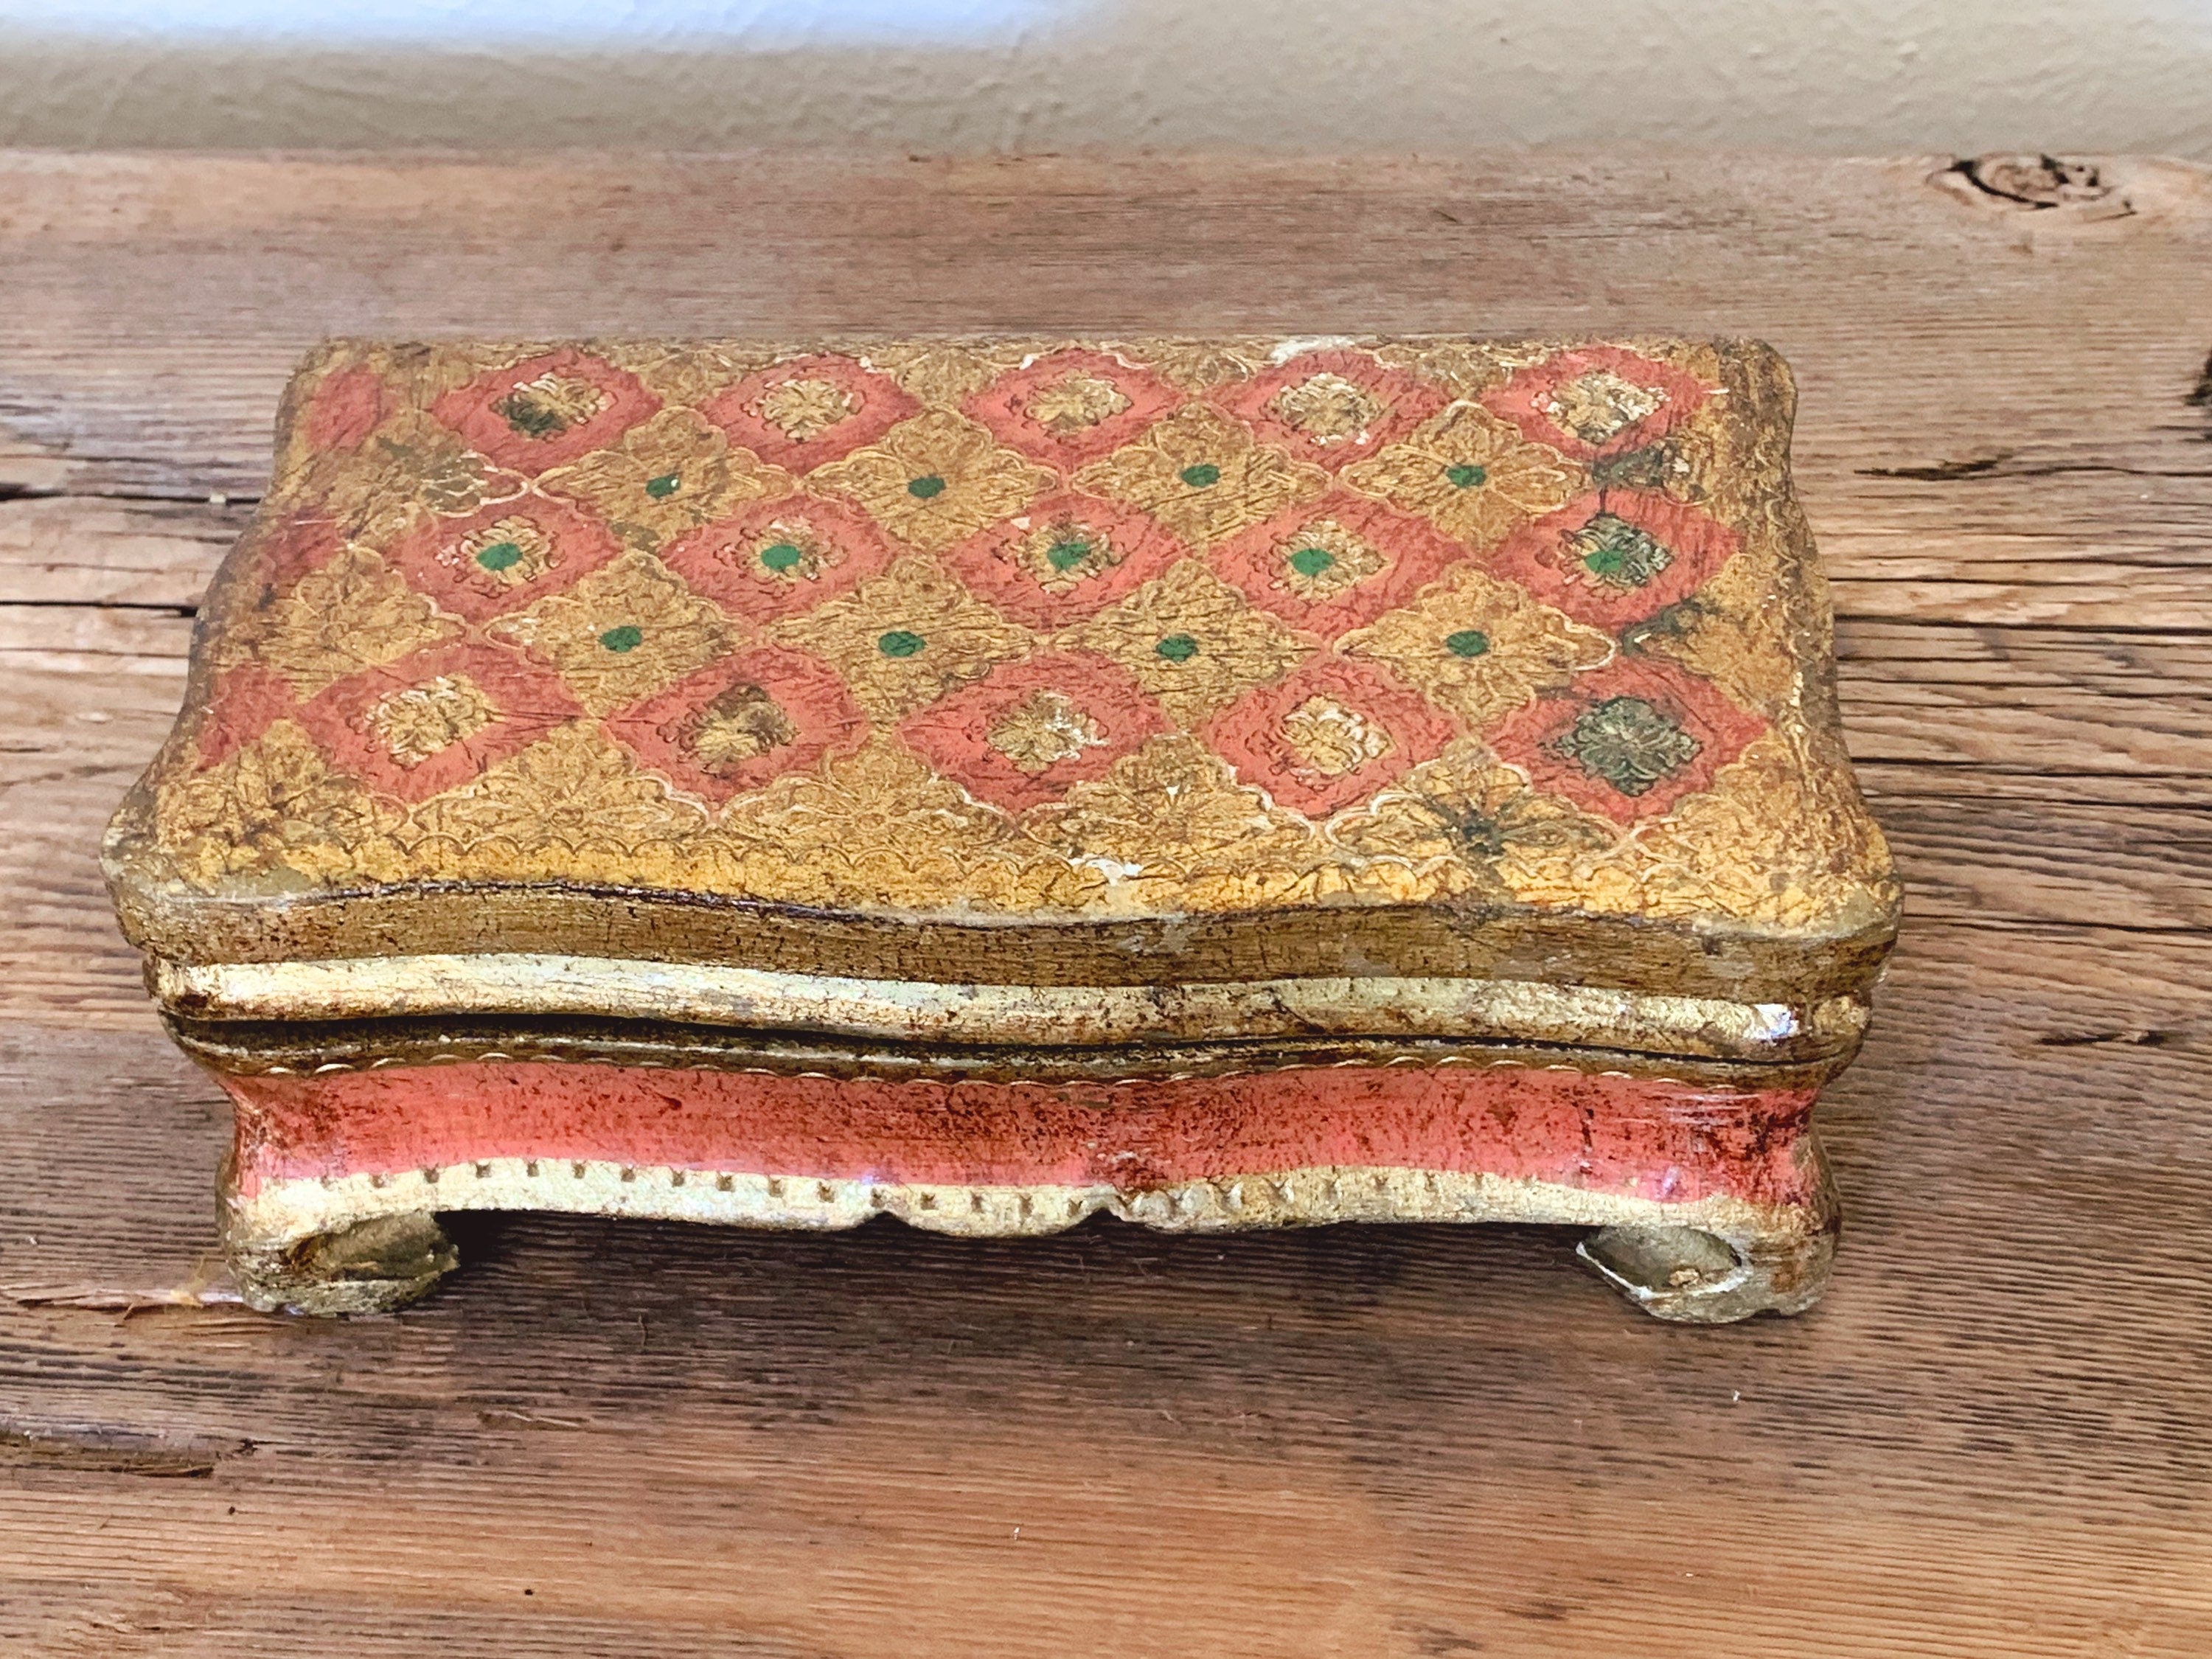 Vintage Italian Florentine Gilt-Wood Footed Jewelry Box | Gold and Pink Distressed Wooden Trinket Box | Bedroom Vanity Decor | Gift for Her